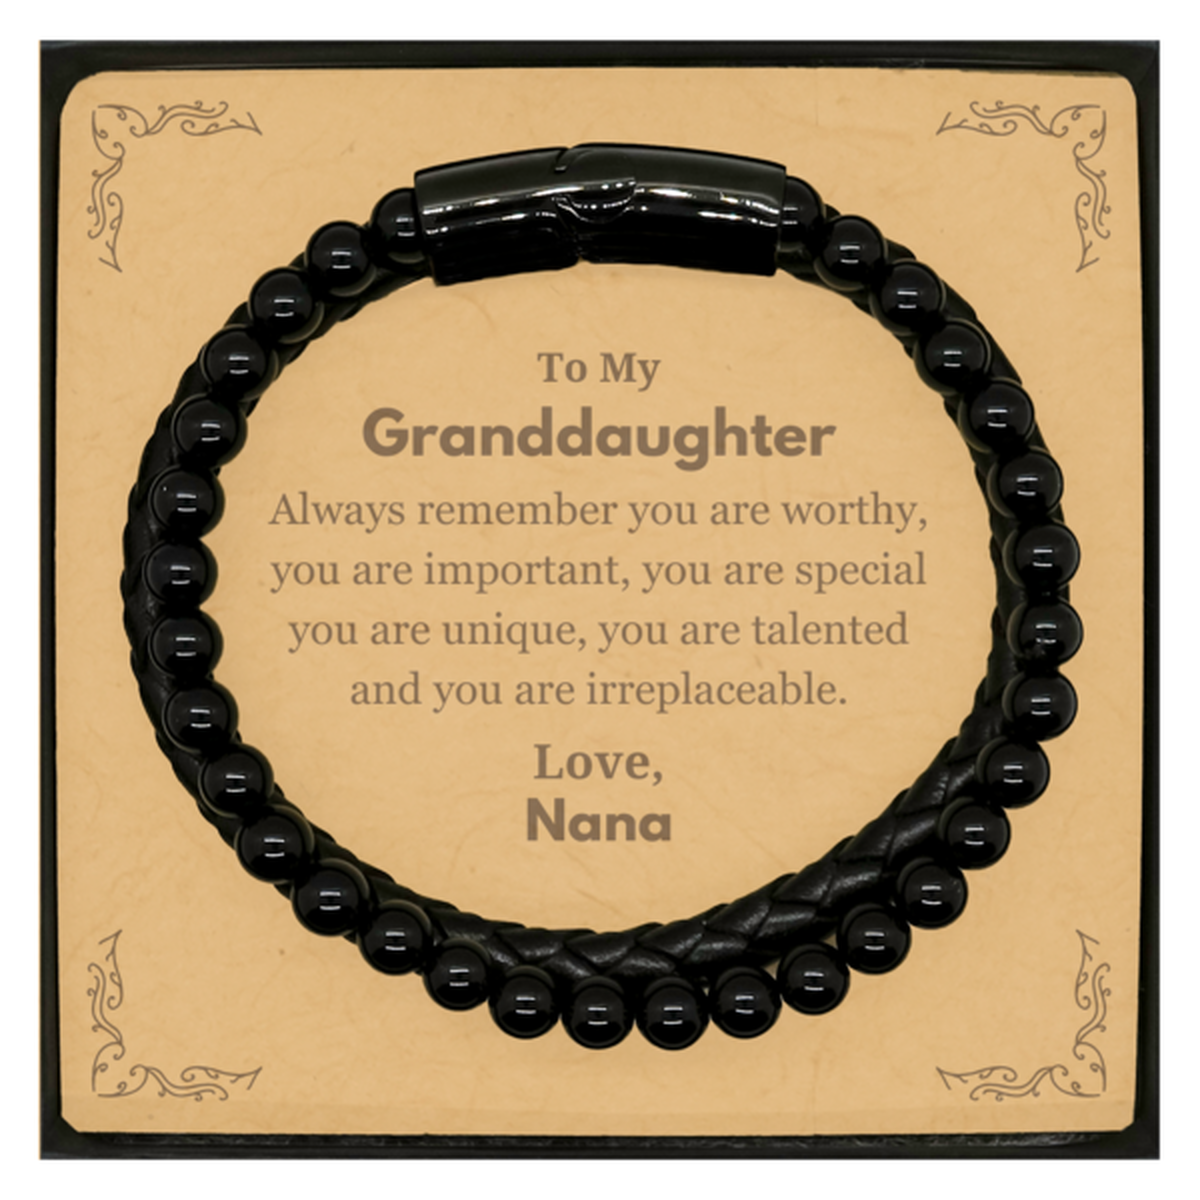 Granddaughter Birthday Gifts from Nana, Inspirational Stone Leather Bracelets for Granddaughter Christmas Graduation Gifts for Granddaughter Always remember you are worthy, you are important. Love, Nana